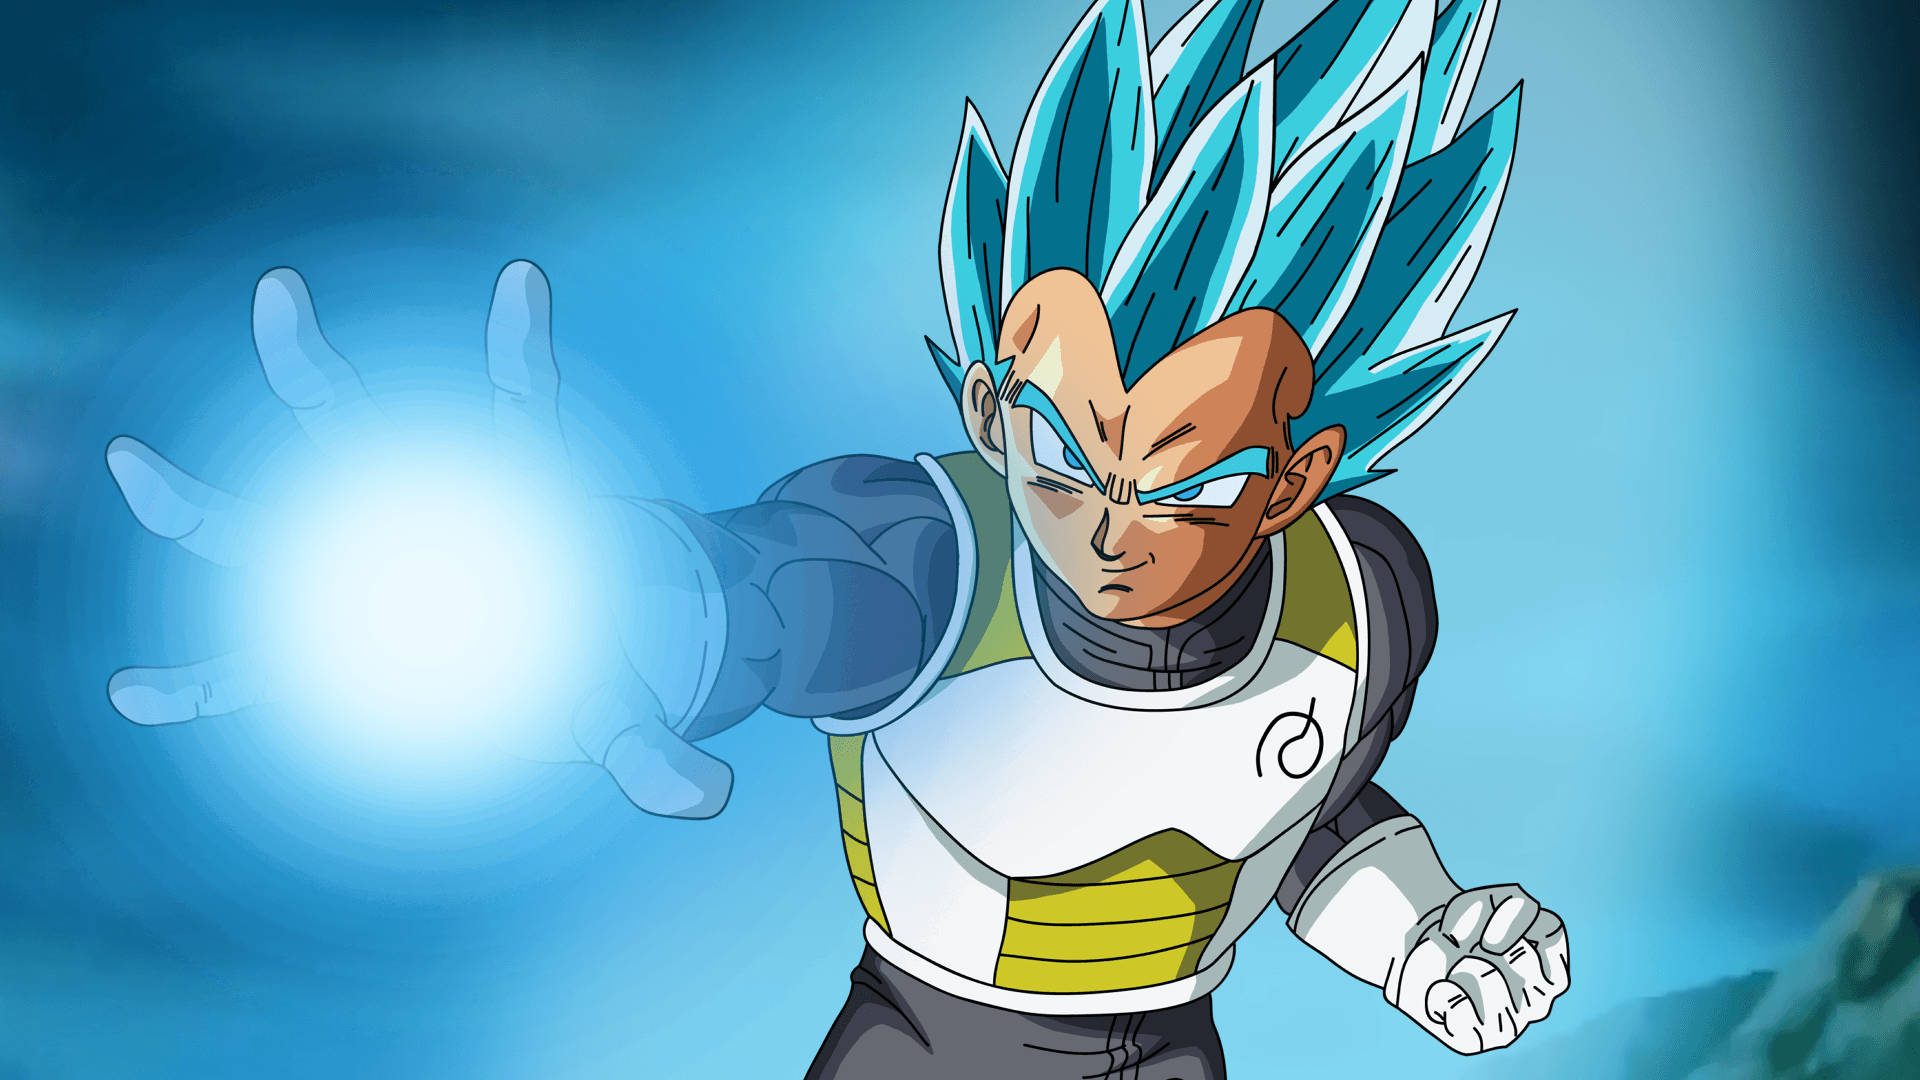 Vegeta charges up his energy ball, ready to unleash destruction. Wallpaper